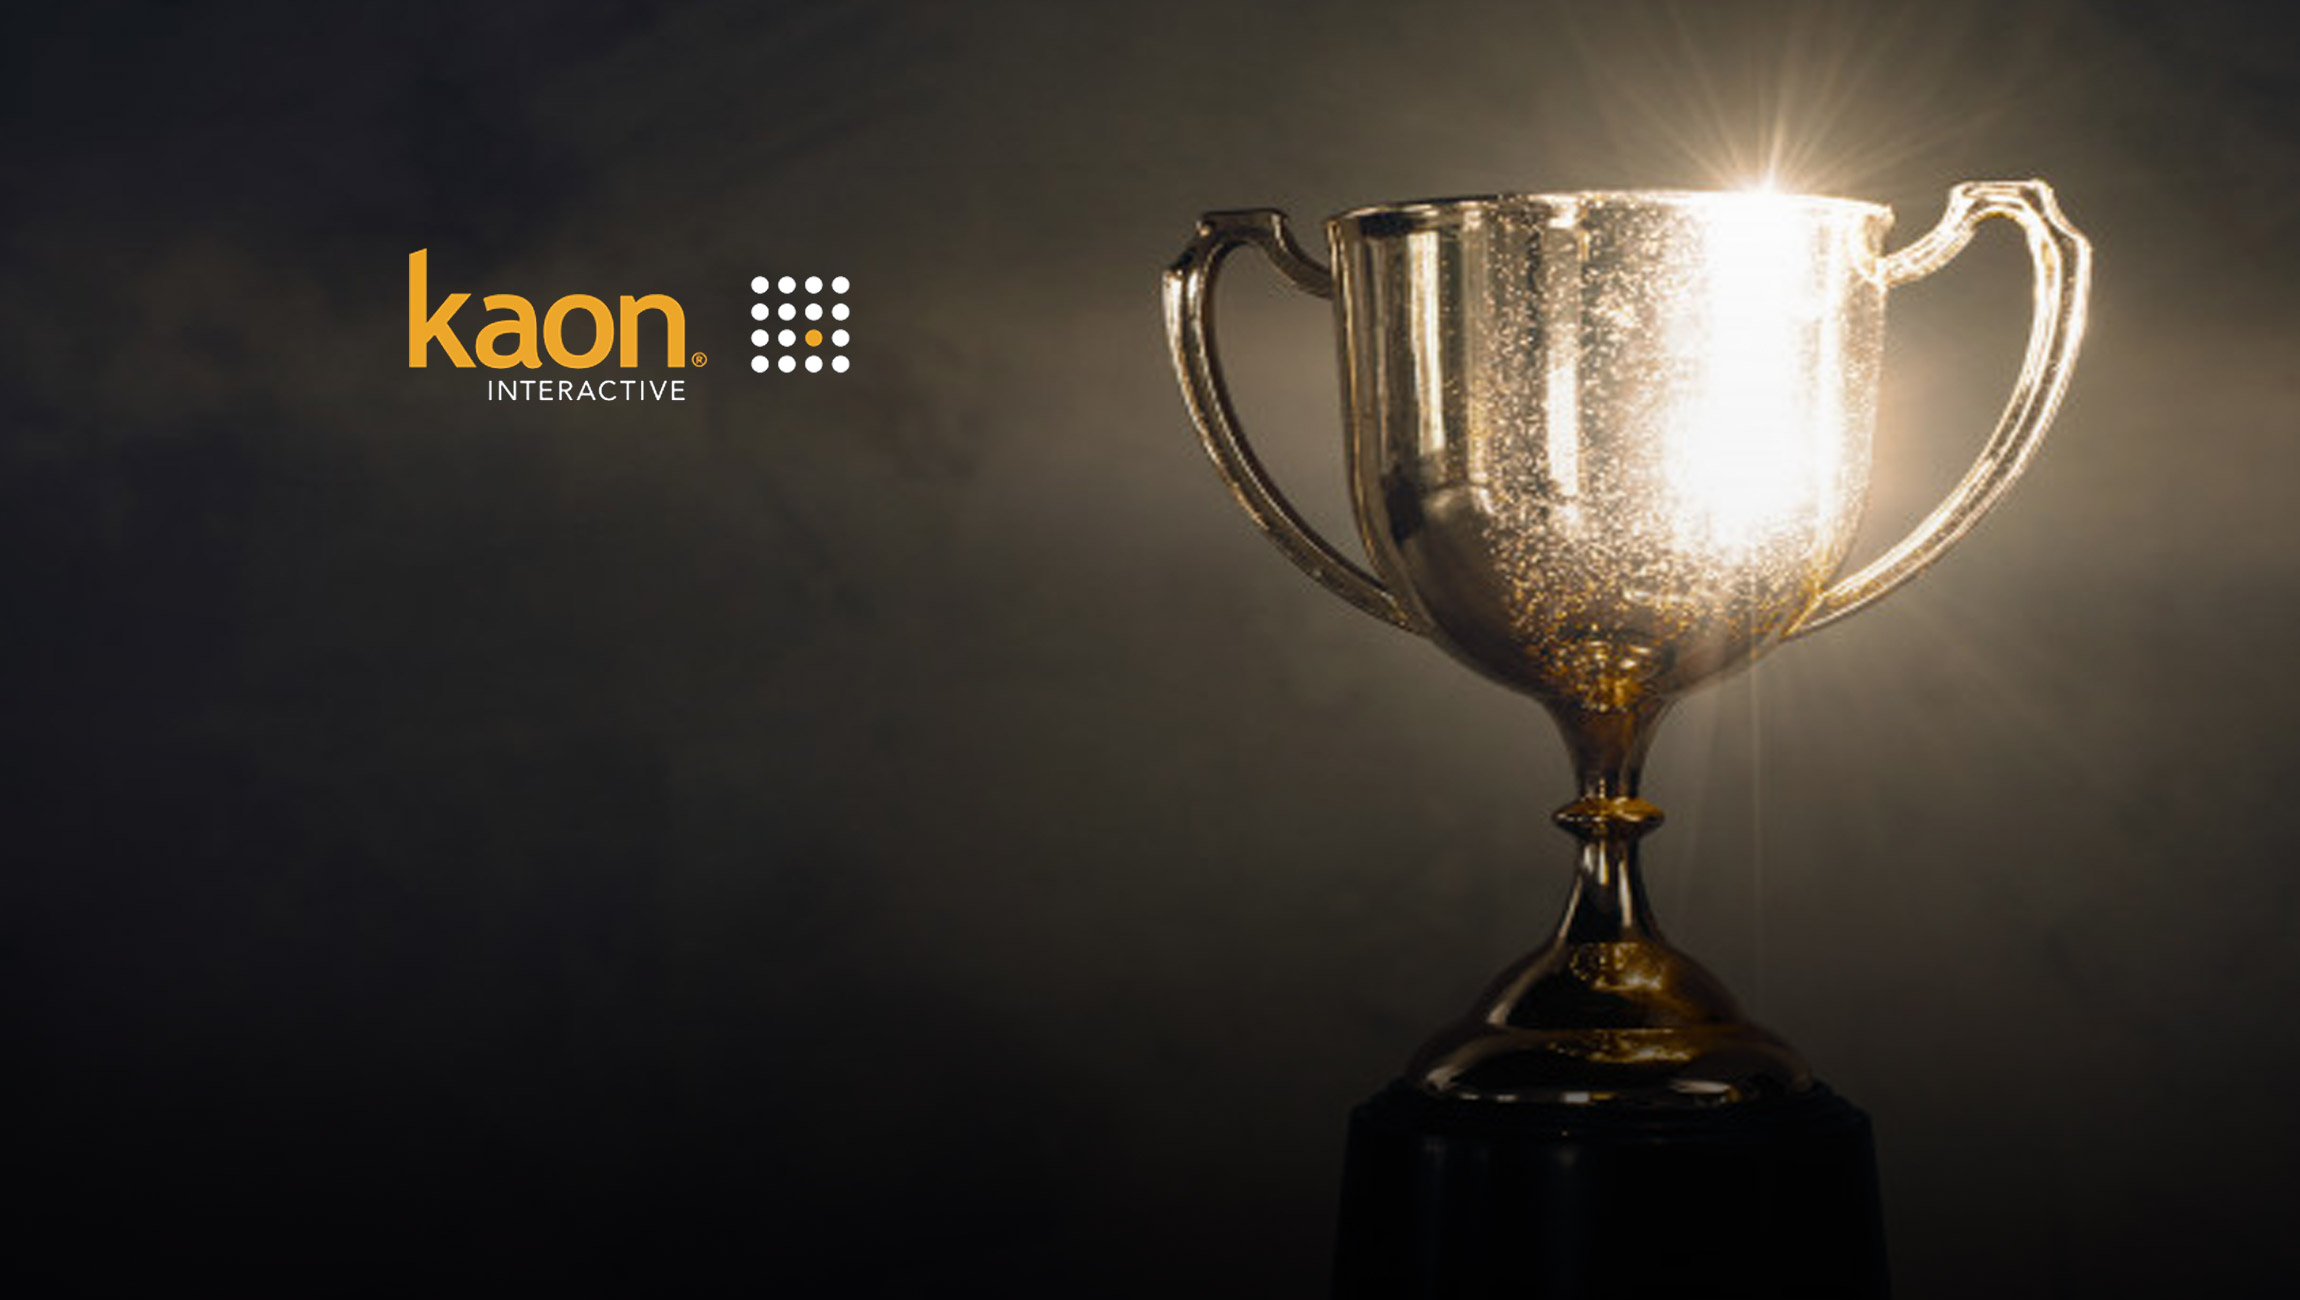 Kaon Interactive's LiveShare Wins Best New Product of the Year from Business Intelligence Awards